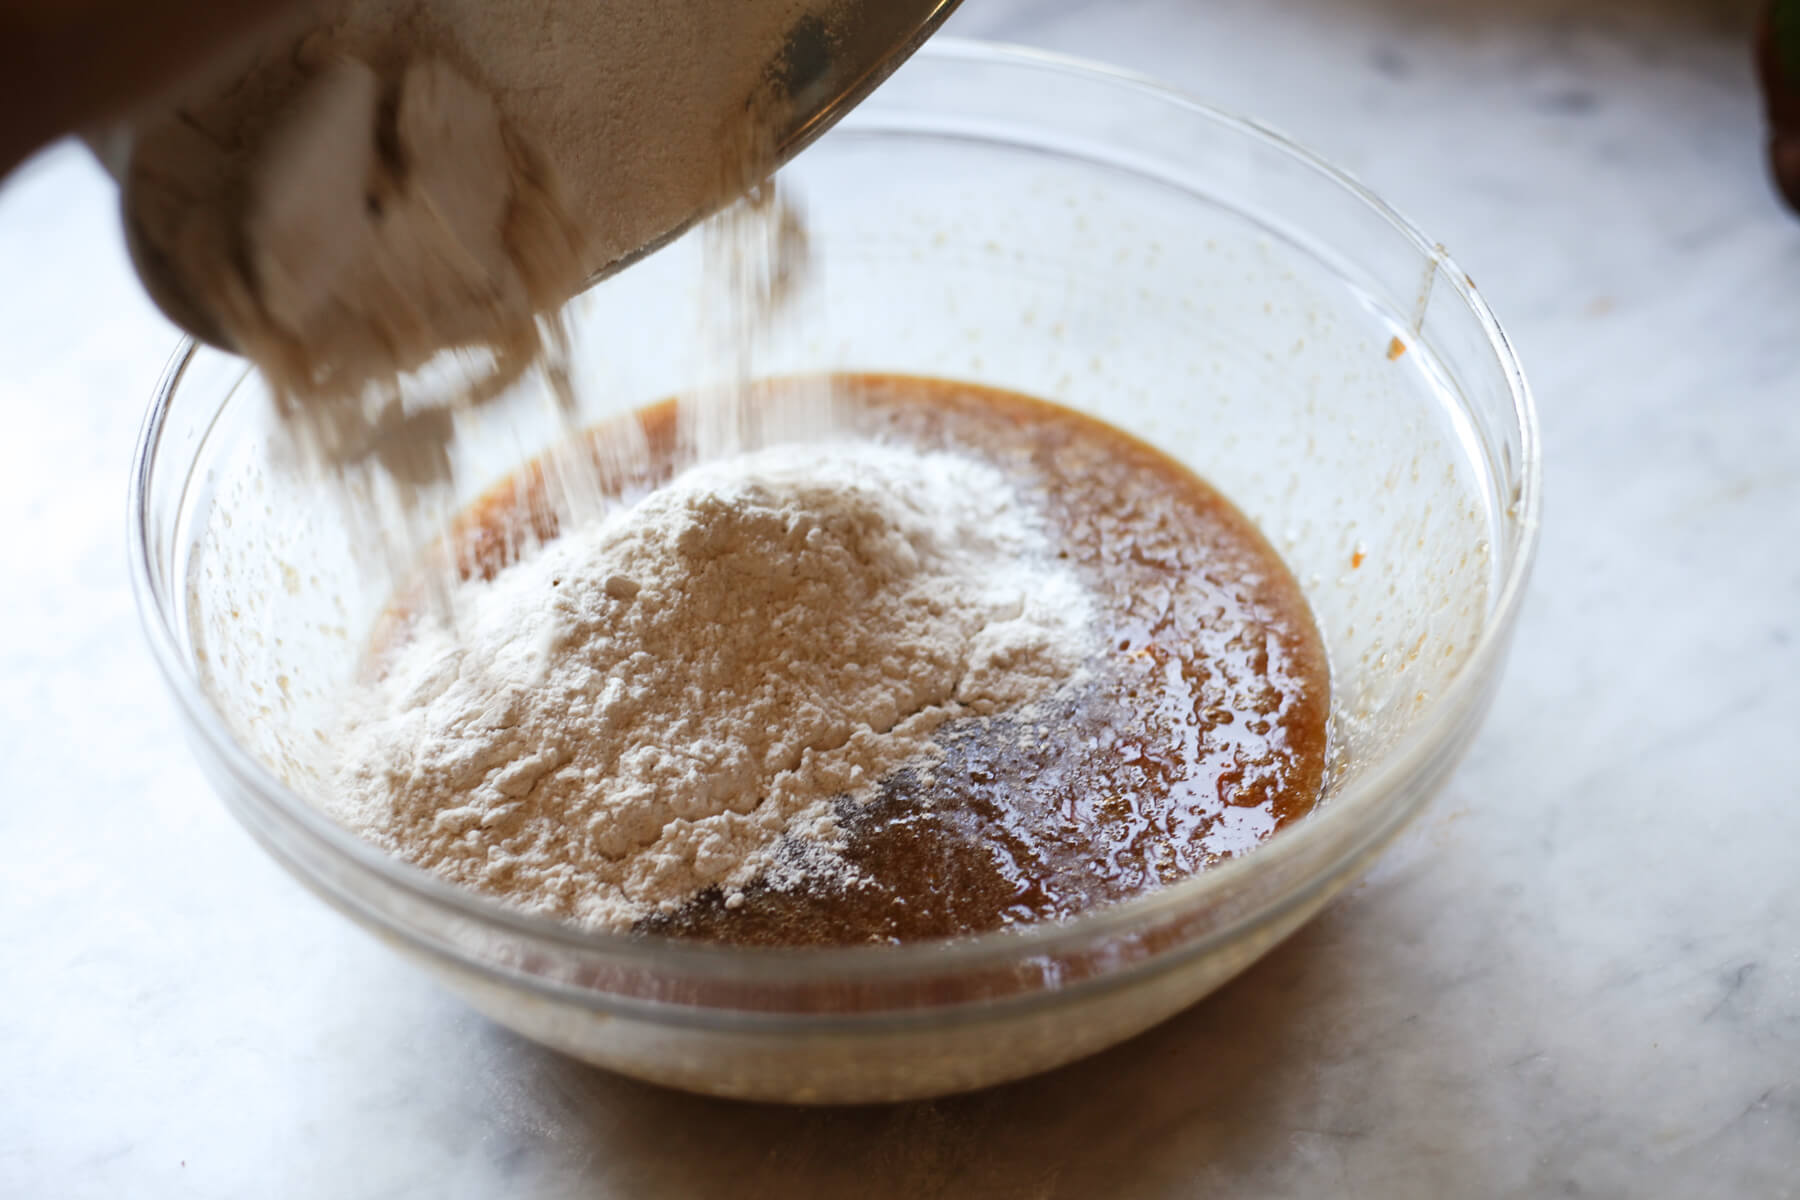 Dry ingredients are added to wet ingredients to make persimmon bread.